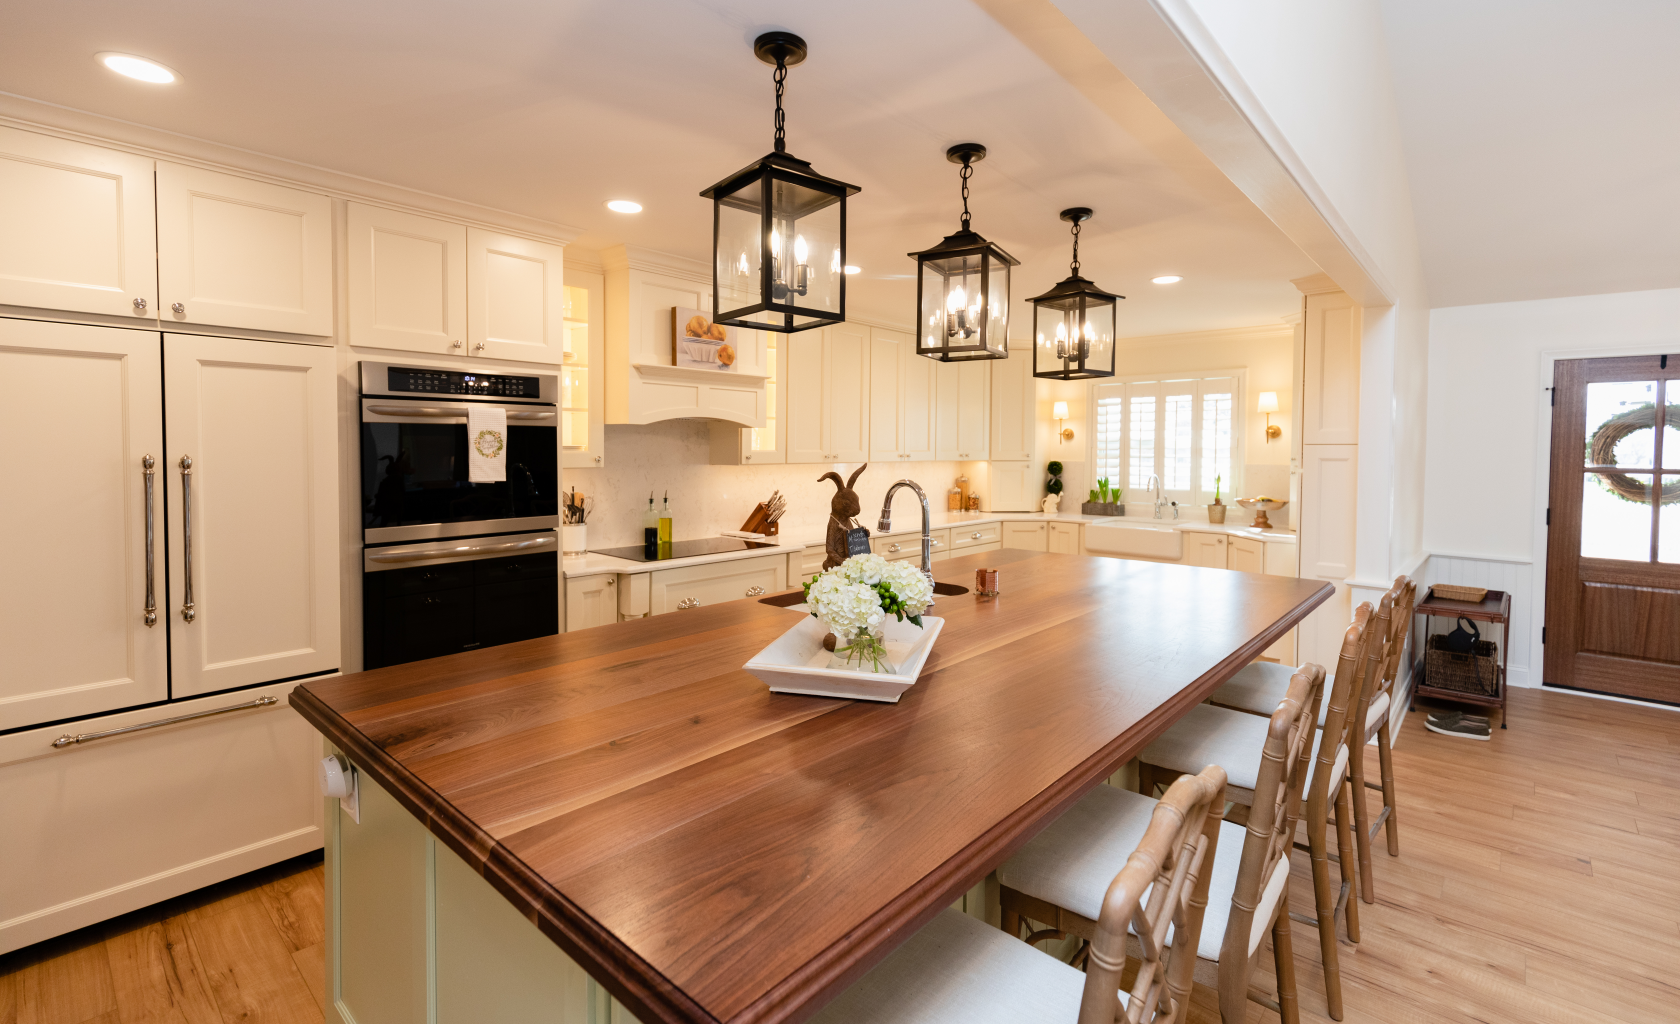 Designing an Efficient Kitchen: 6 Tips to Consider for your Kitchen Remodel